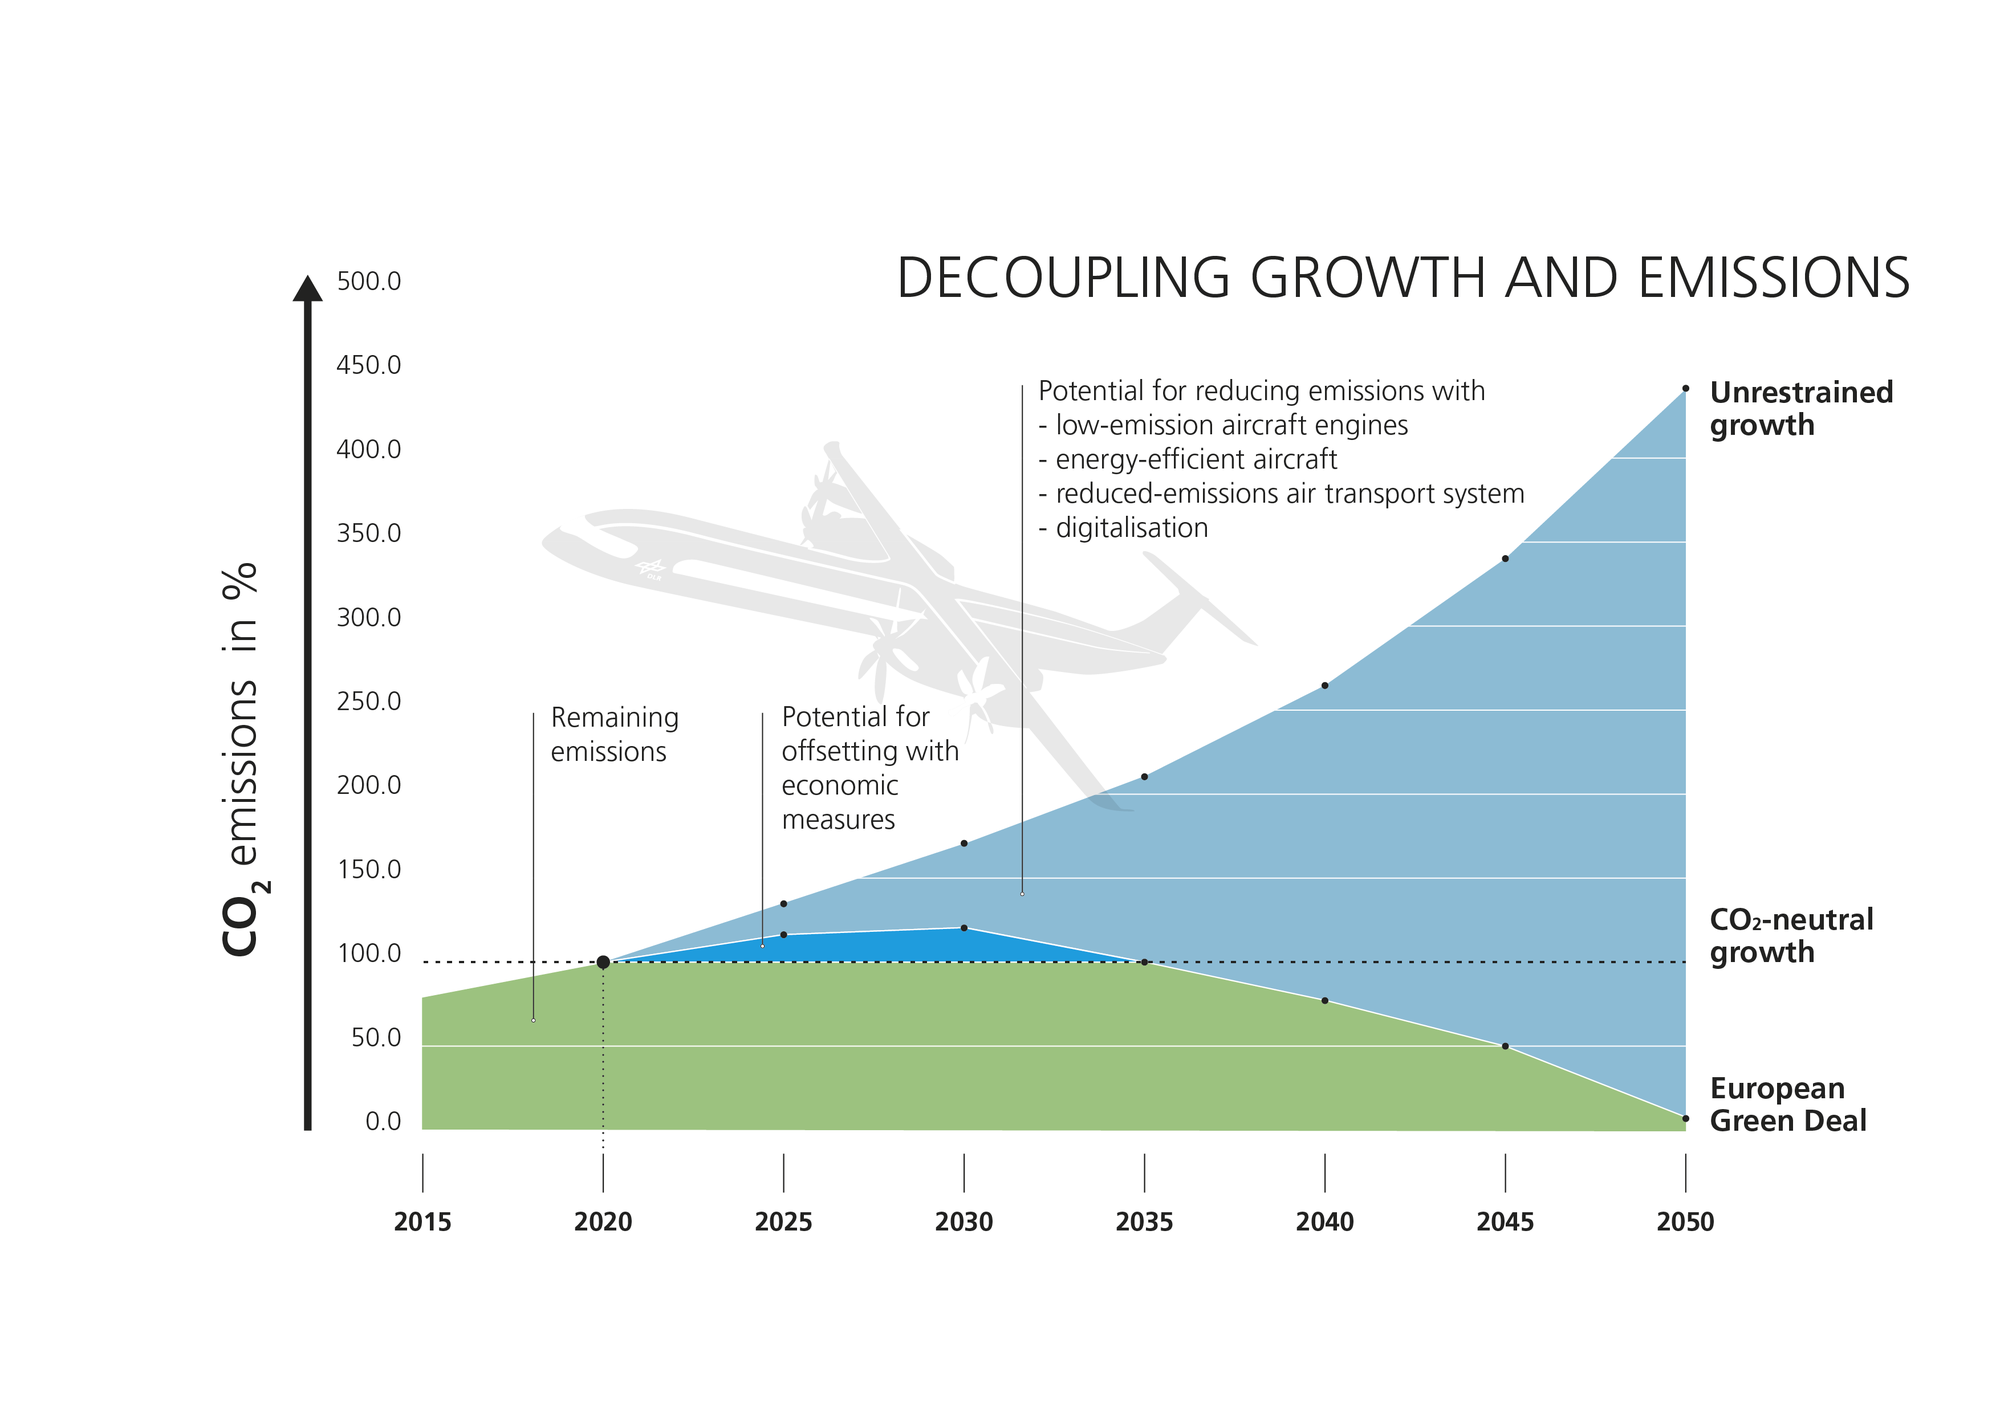 Decoupling growth and emissions